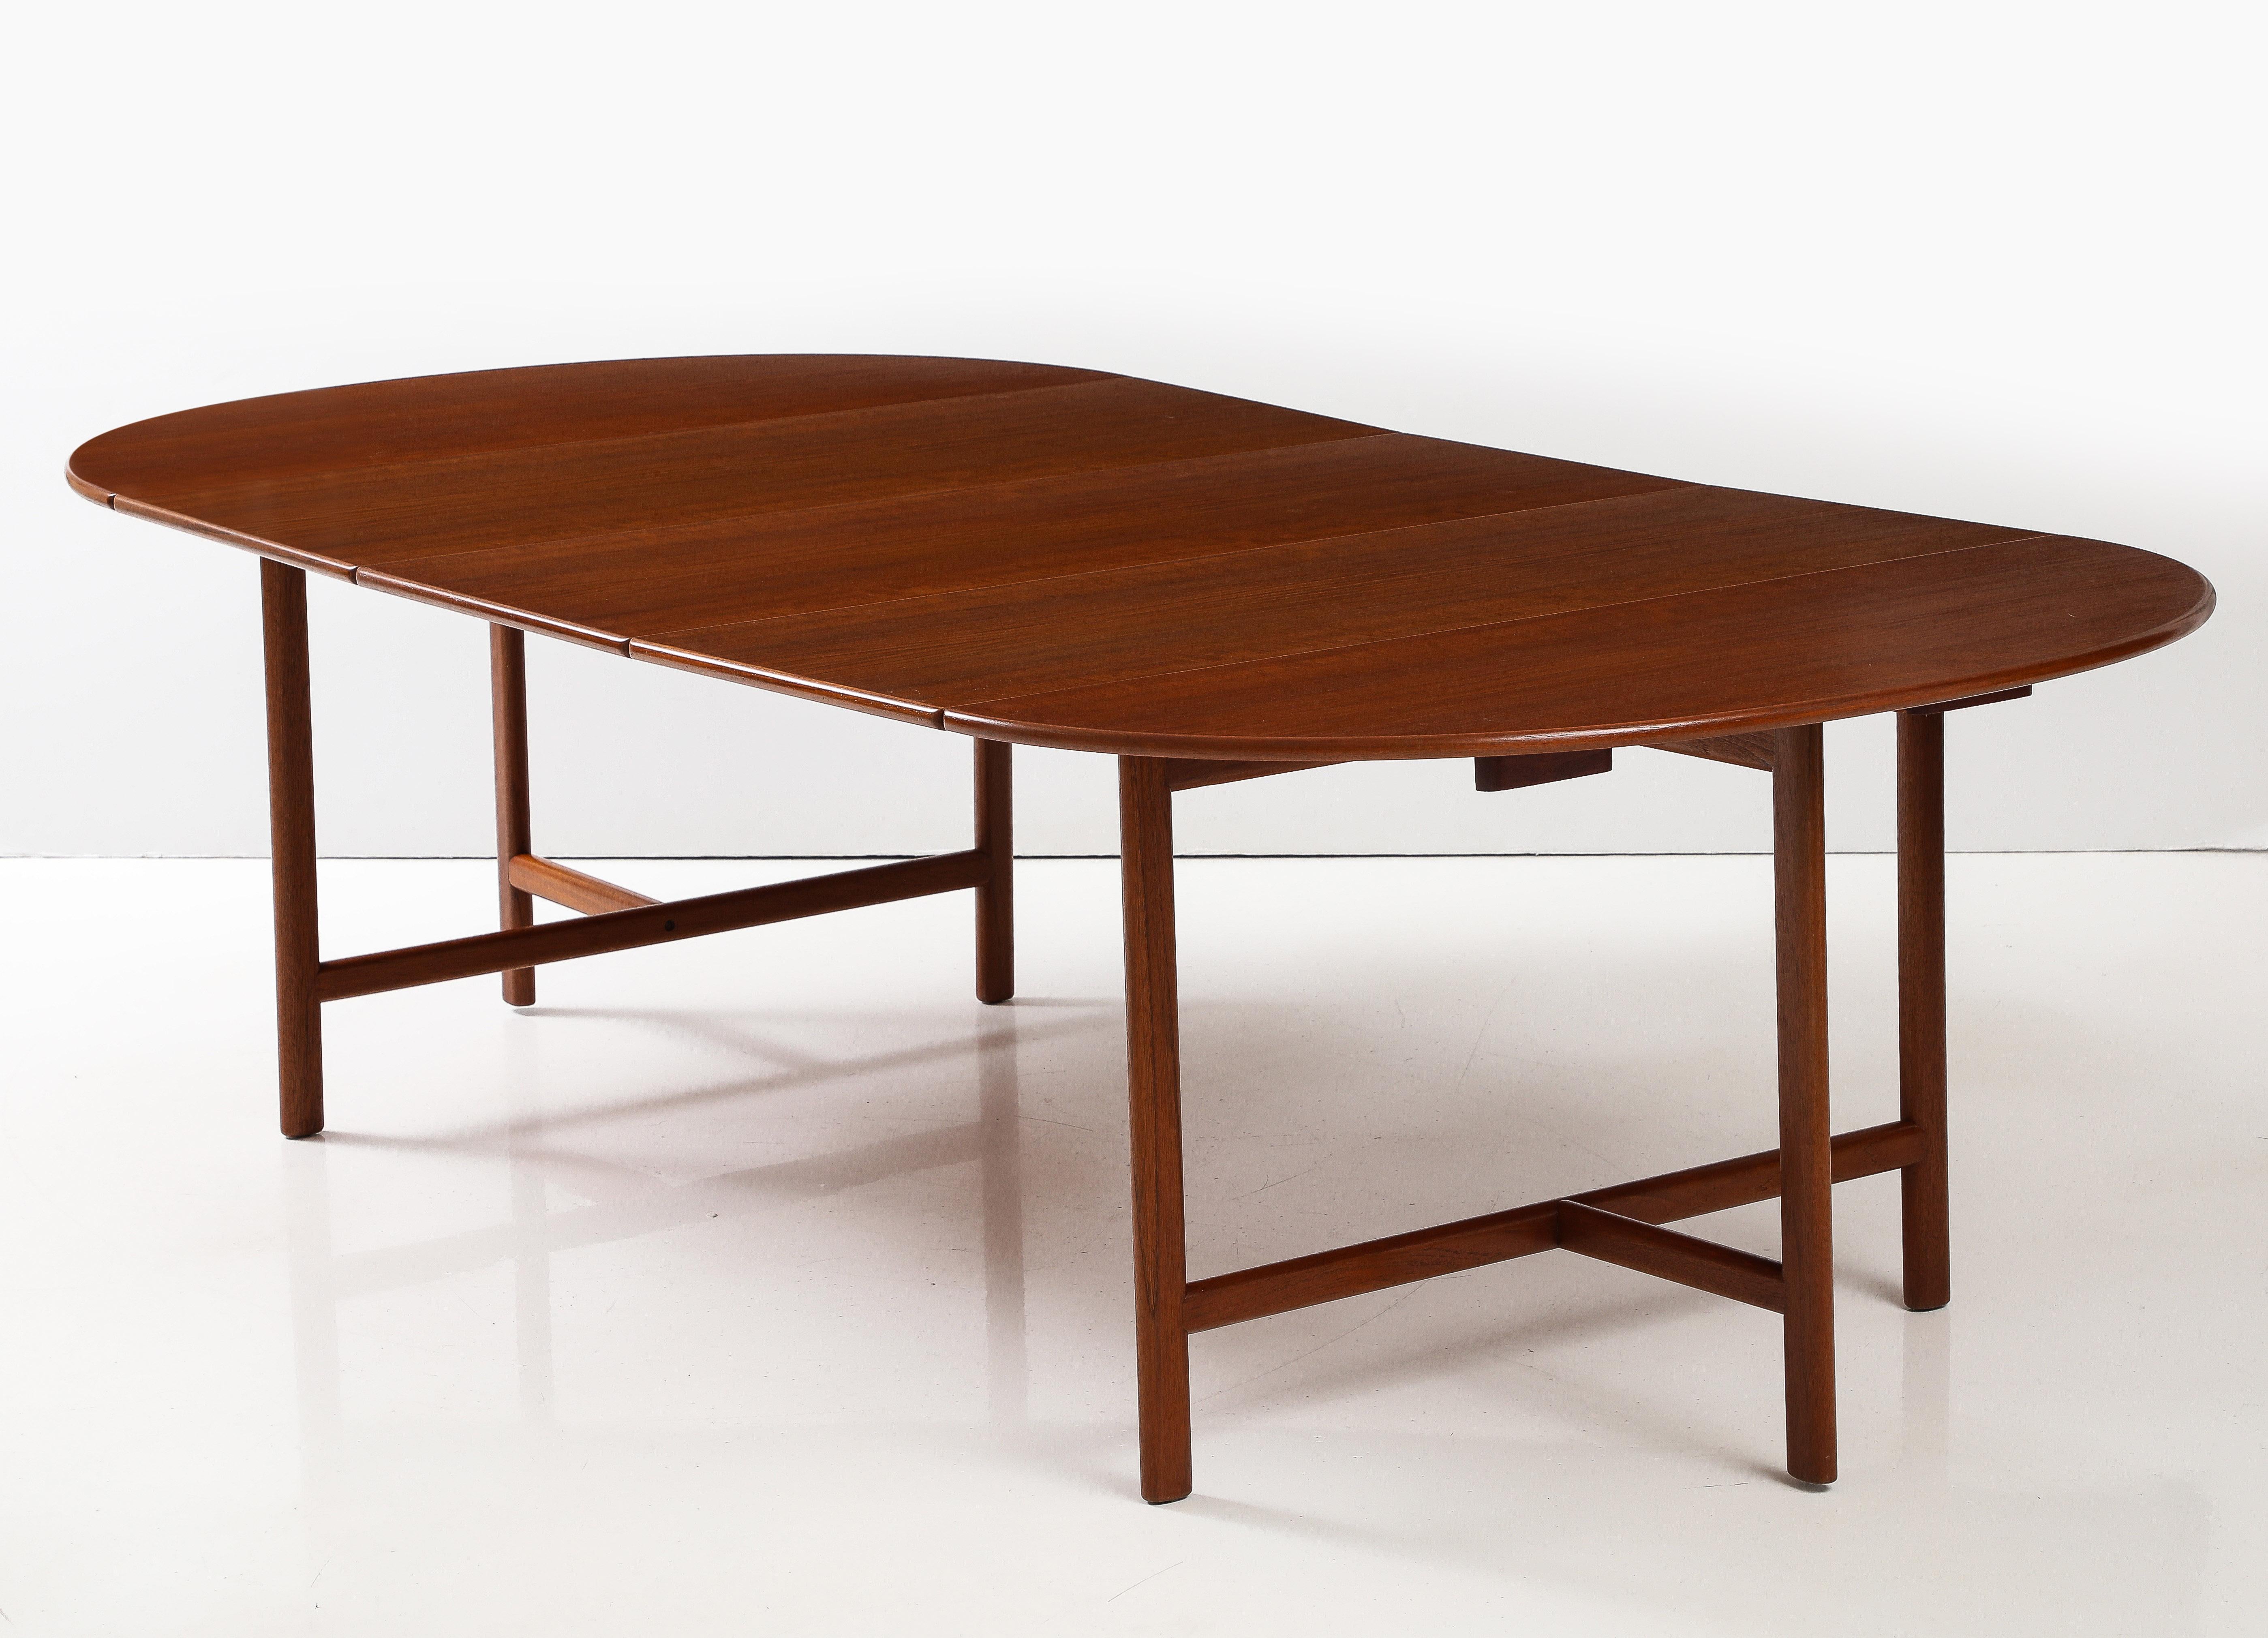 Amazing 1960's mid-century modern teak dining table with 3 leaves designed by Karl-Erik Ekselius For JOC Vetlanda, fully restored with minor wear and patina due to age and use, each leave measures 19.5 inches width.

Width without leaves is: